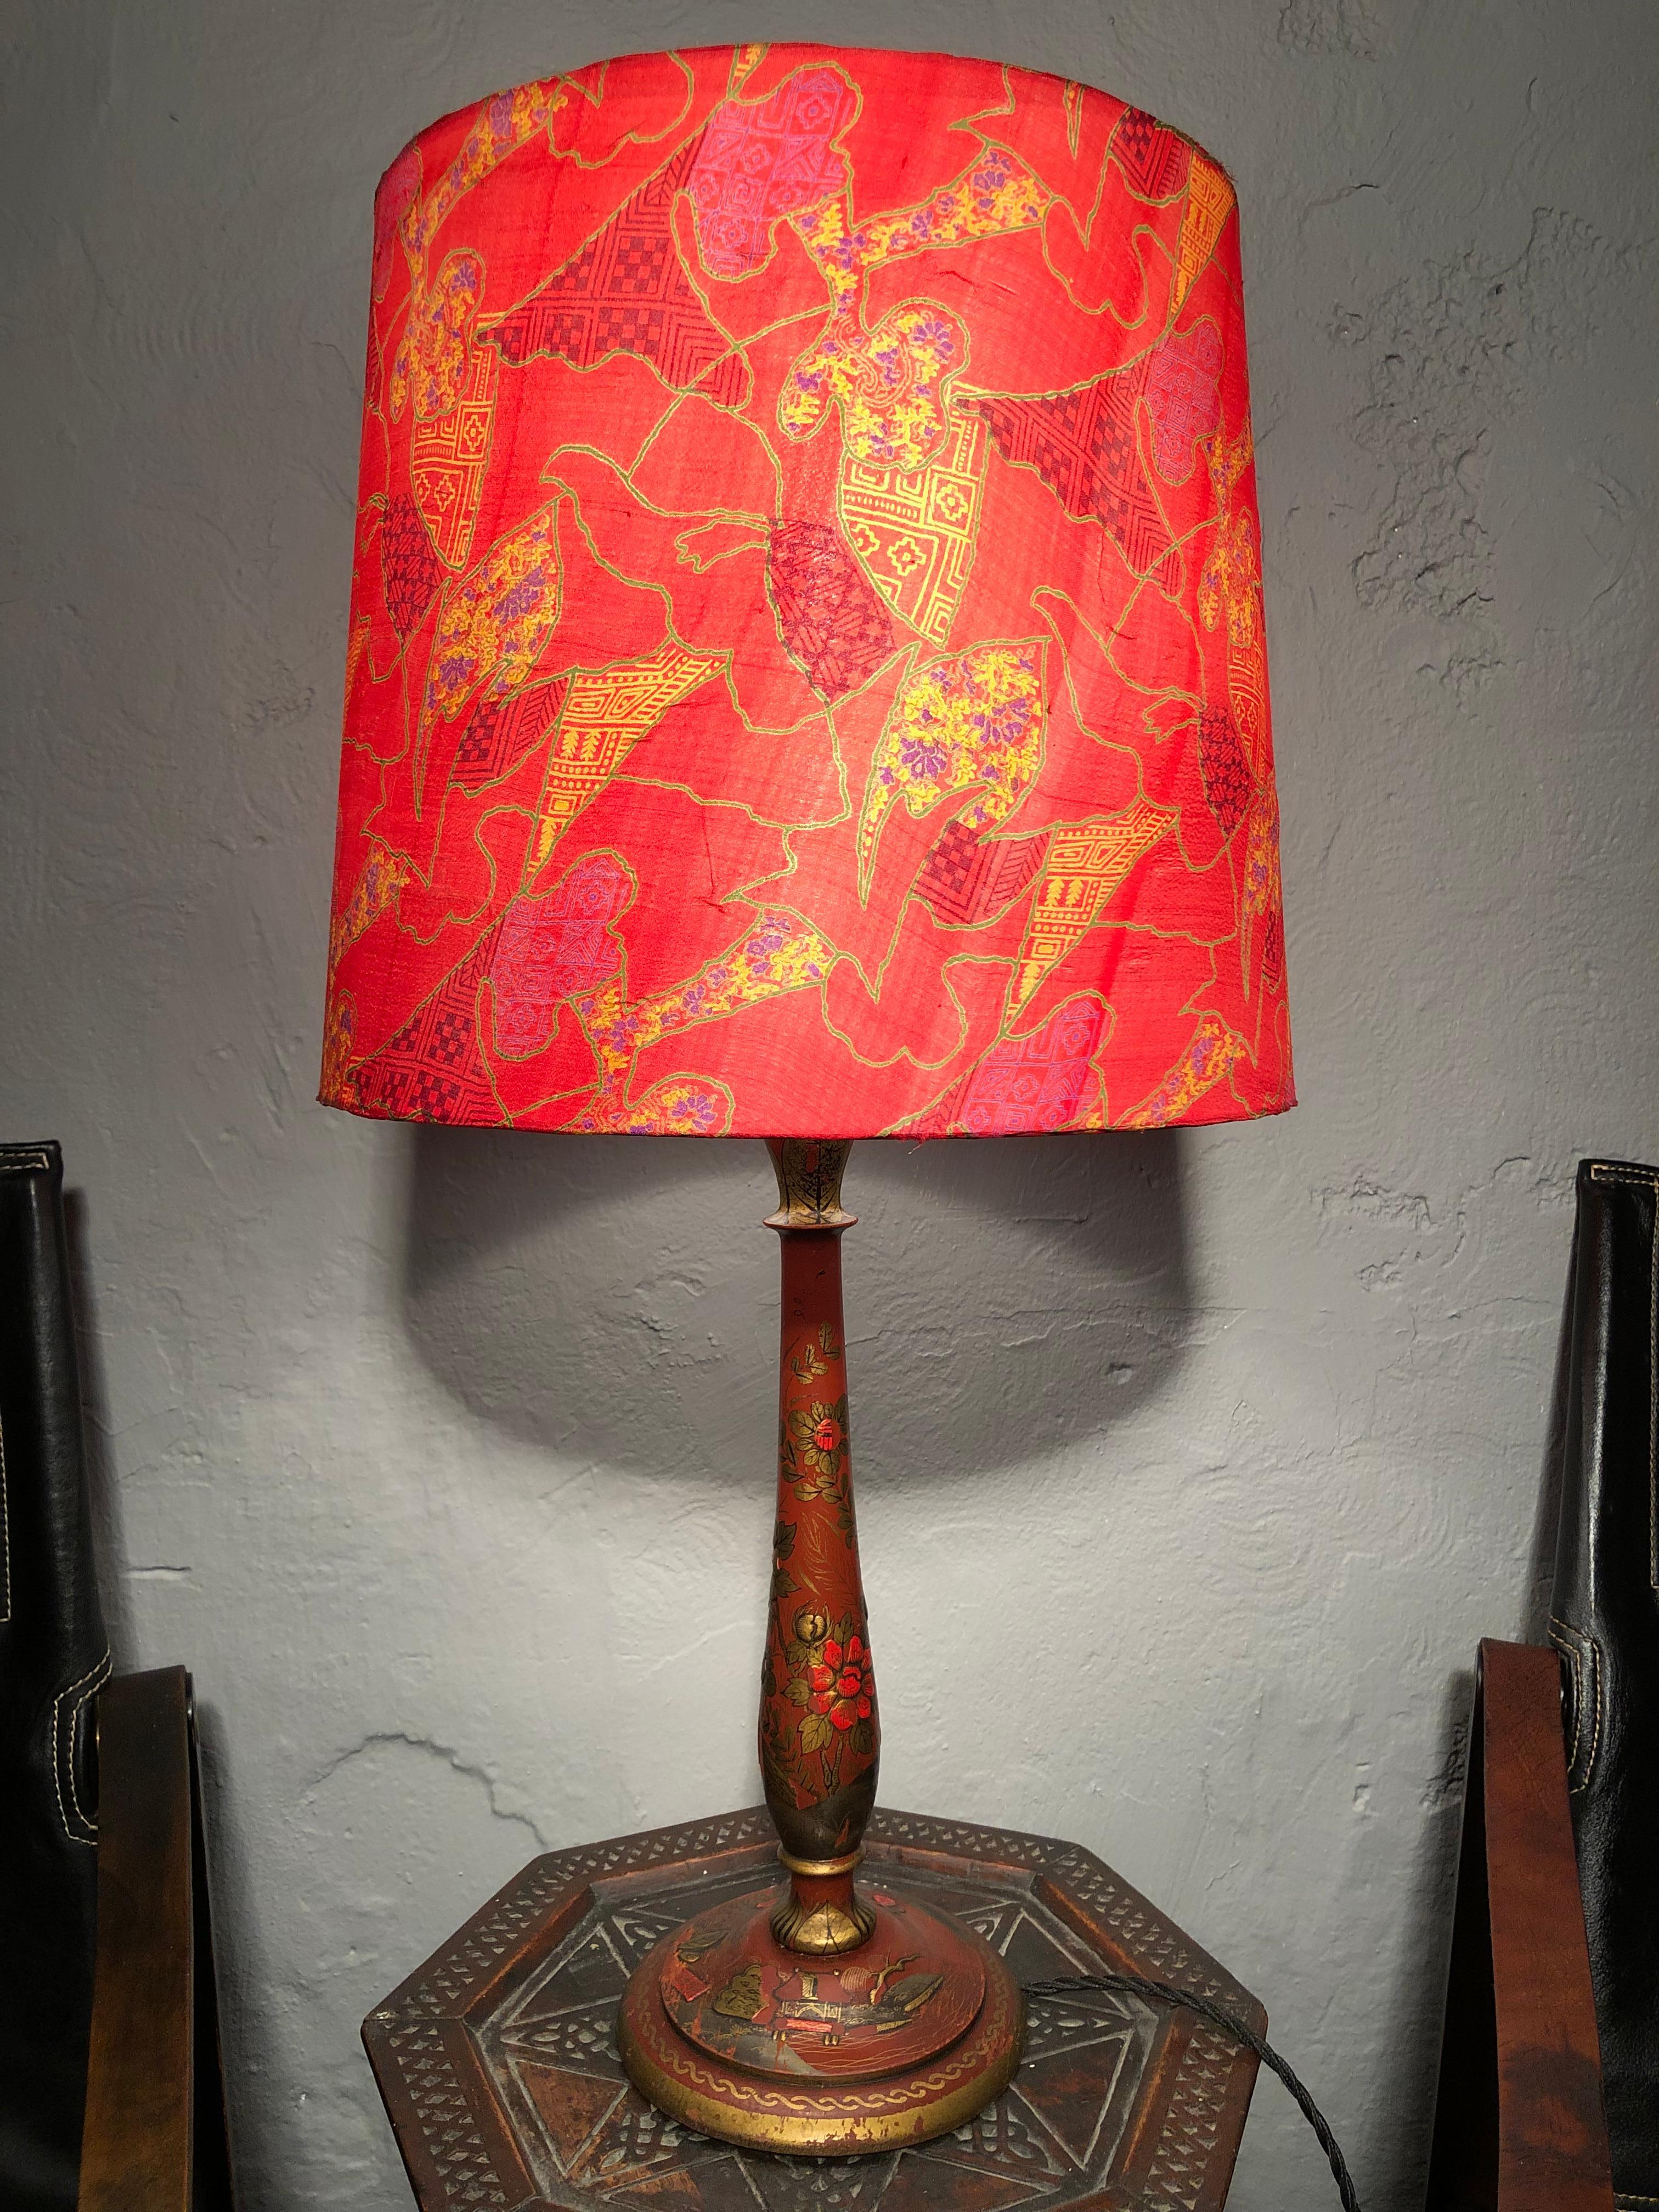 An antique Chinoiserie table lamp in a classic period design. 
Richly decorated base with butterflies, birds, flowers and architecture. 
Turned stem decorated with flowers.
Still maintaining the original brass and porcelain lamp holder with a